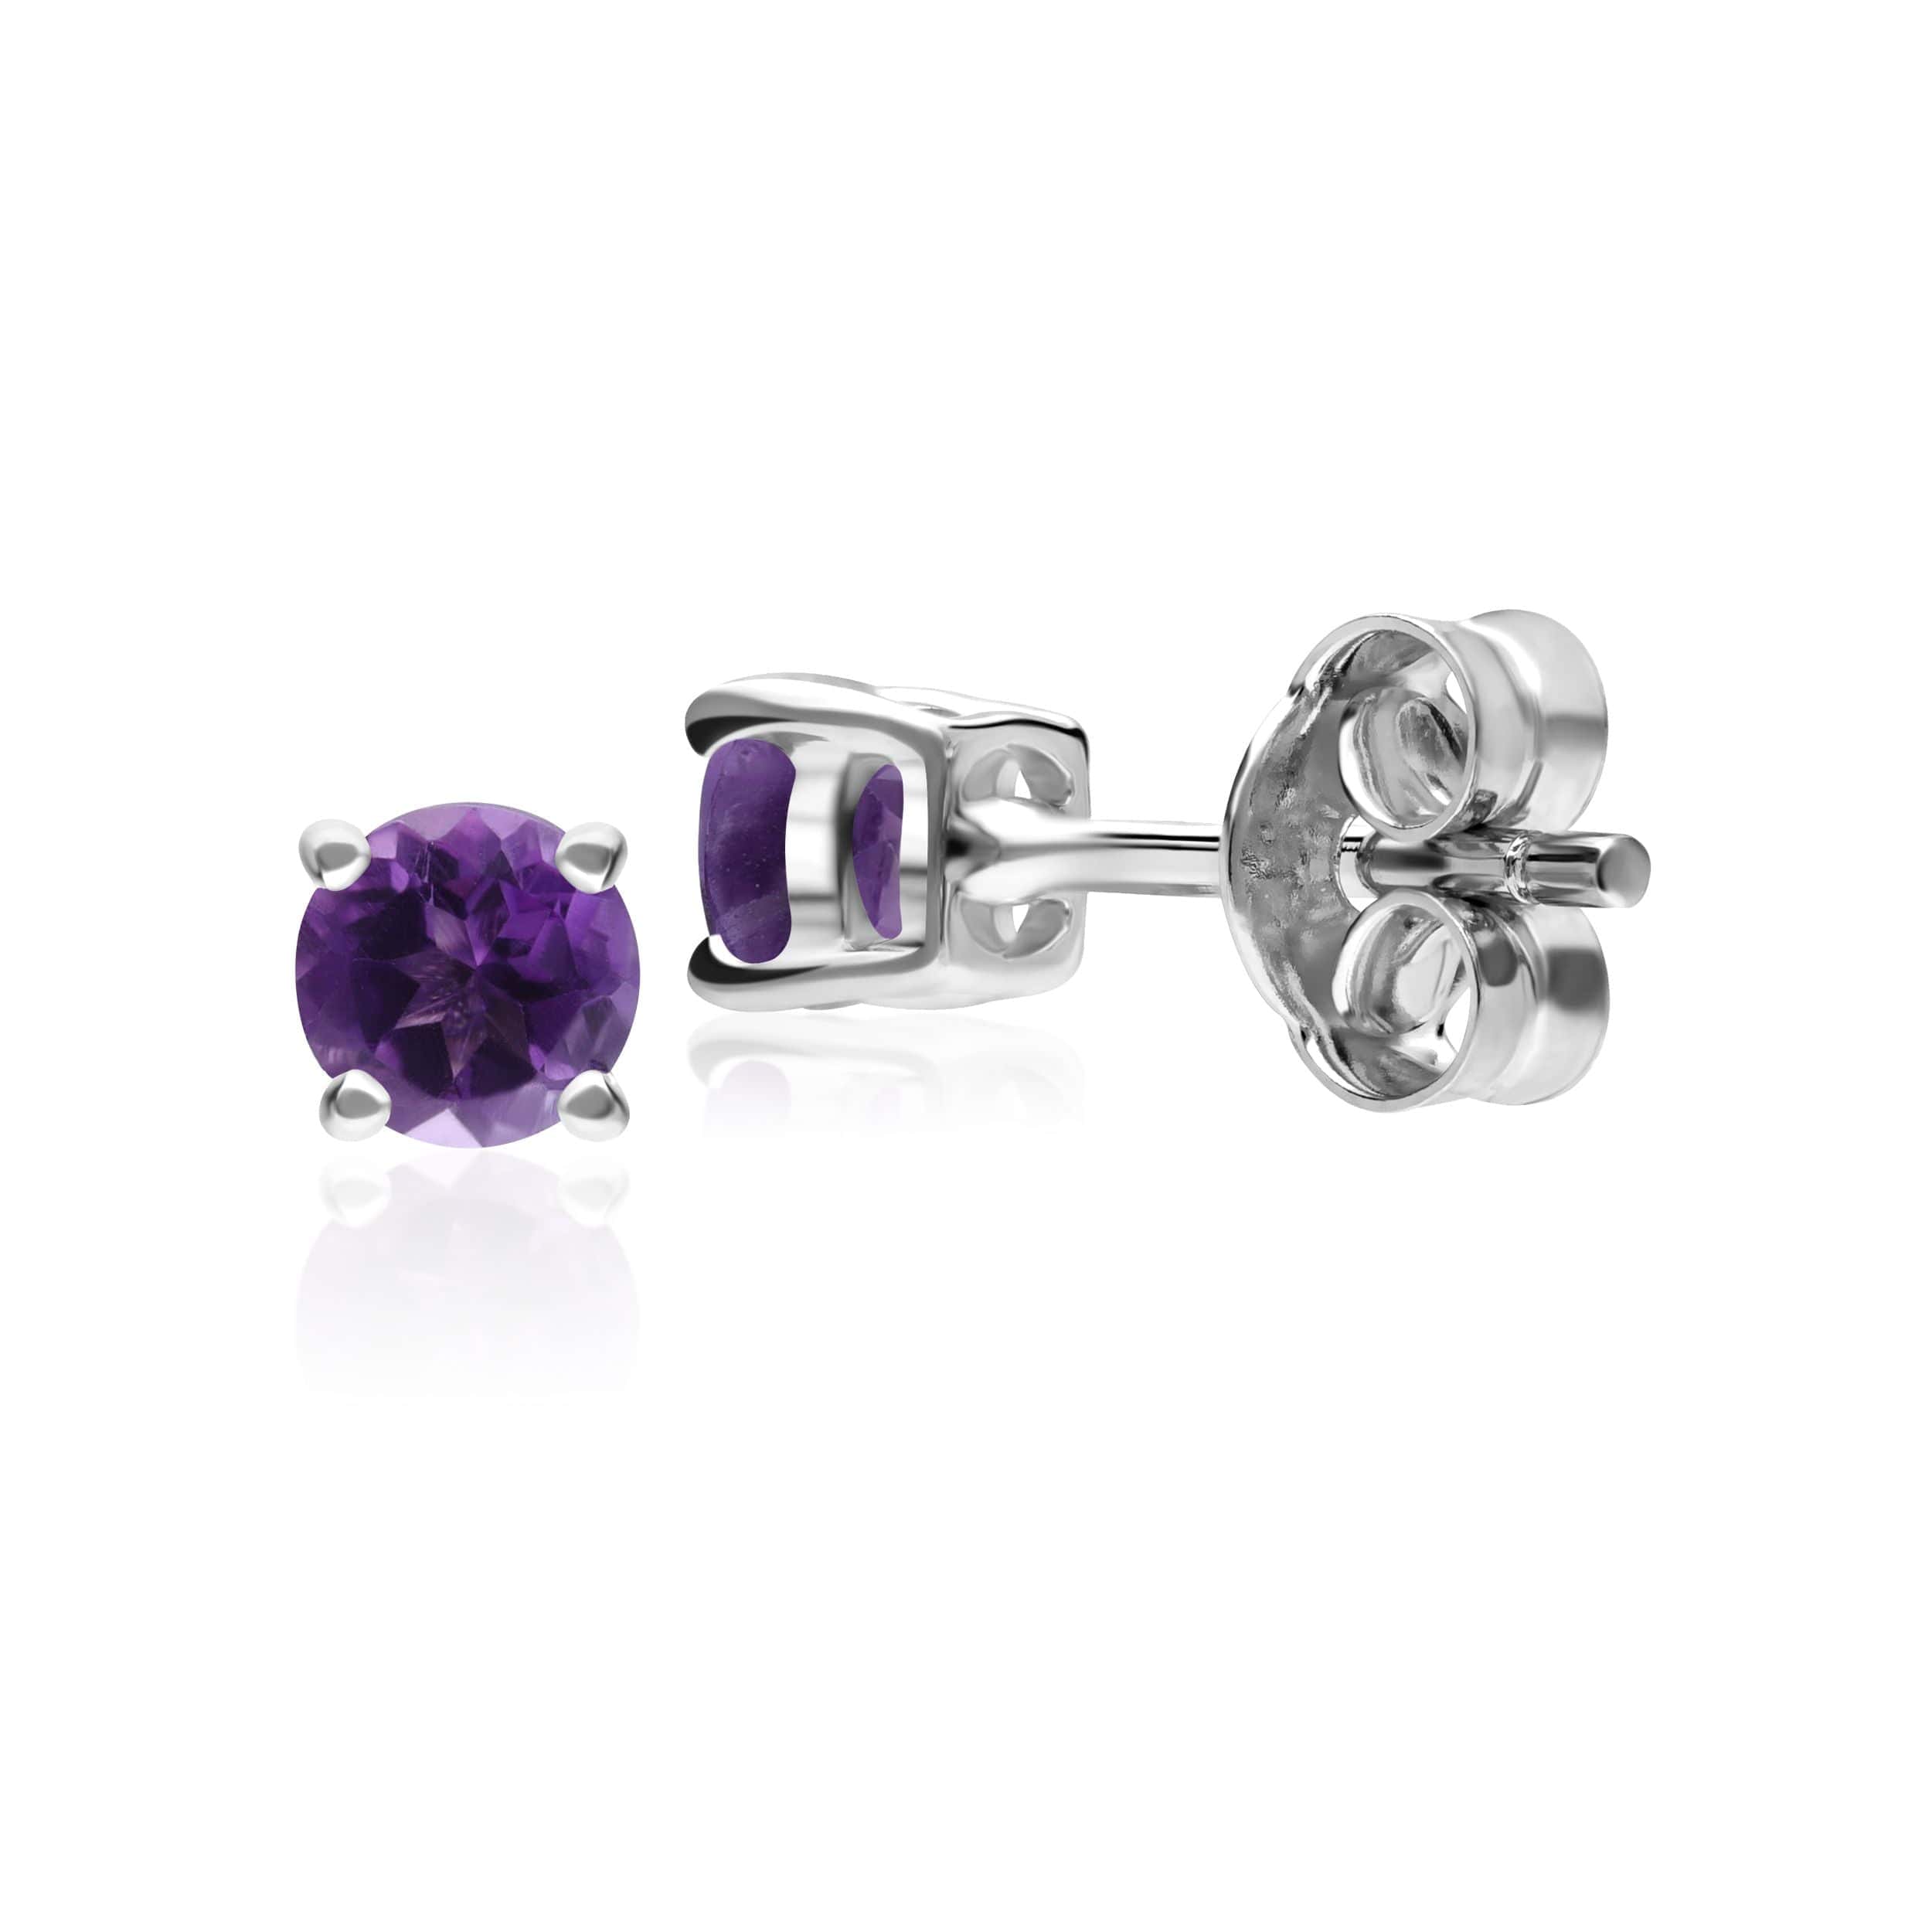 Classic Round Amethyst 6 Claw Set Stud Earrings in 925 Sterling Silver